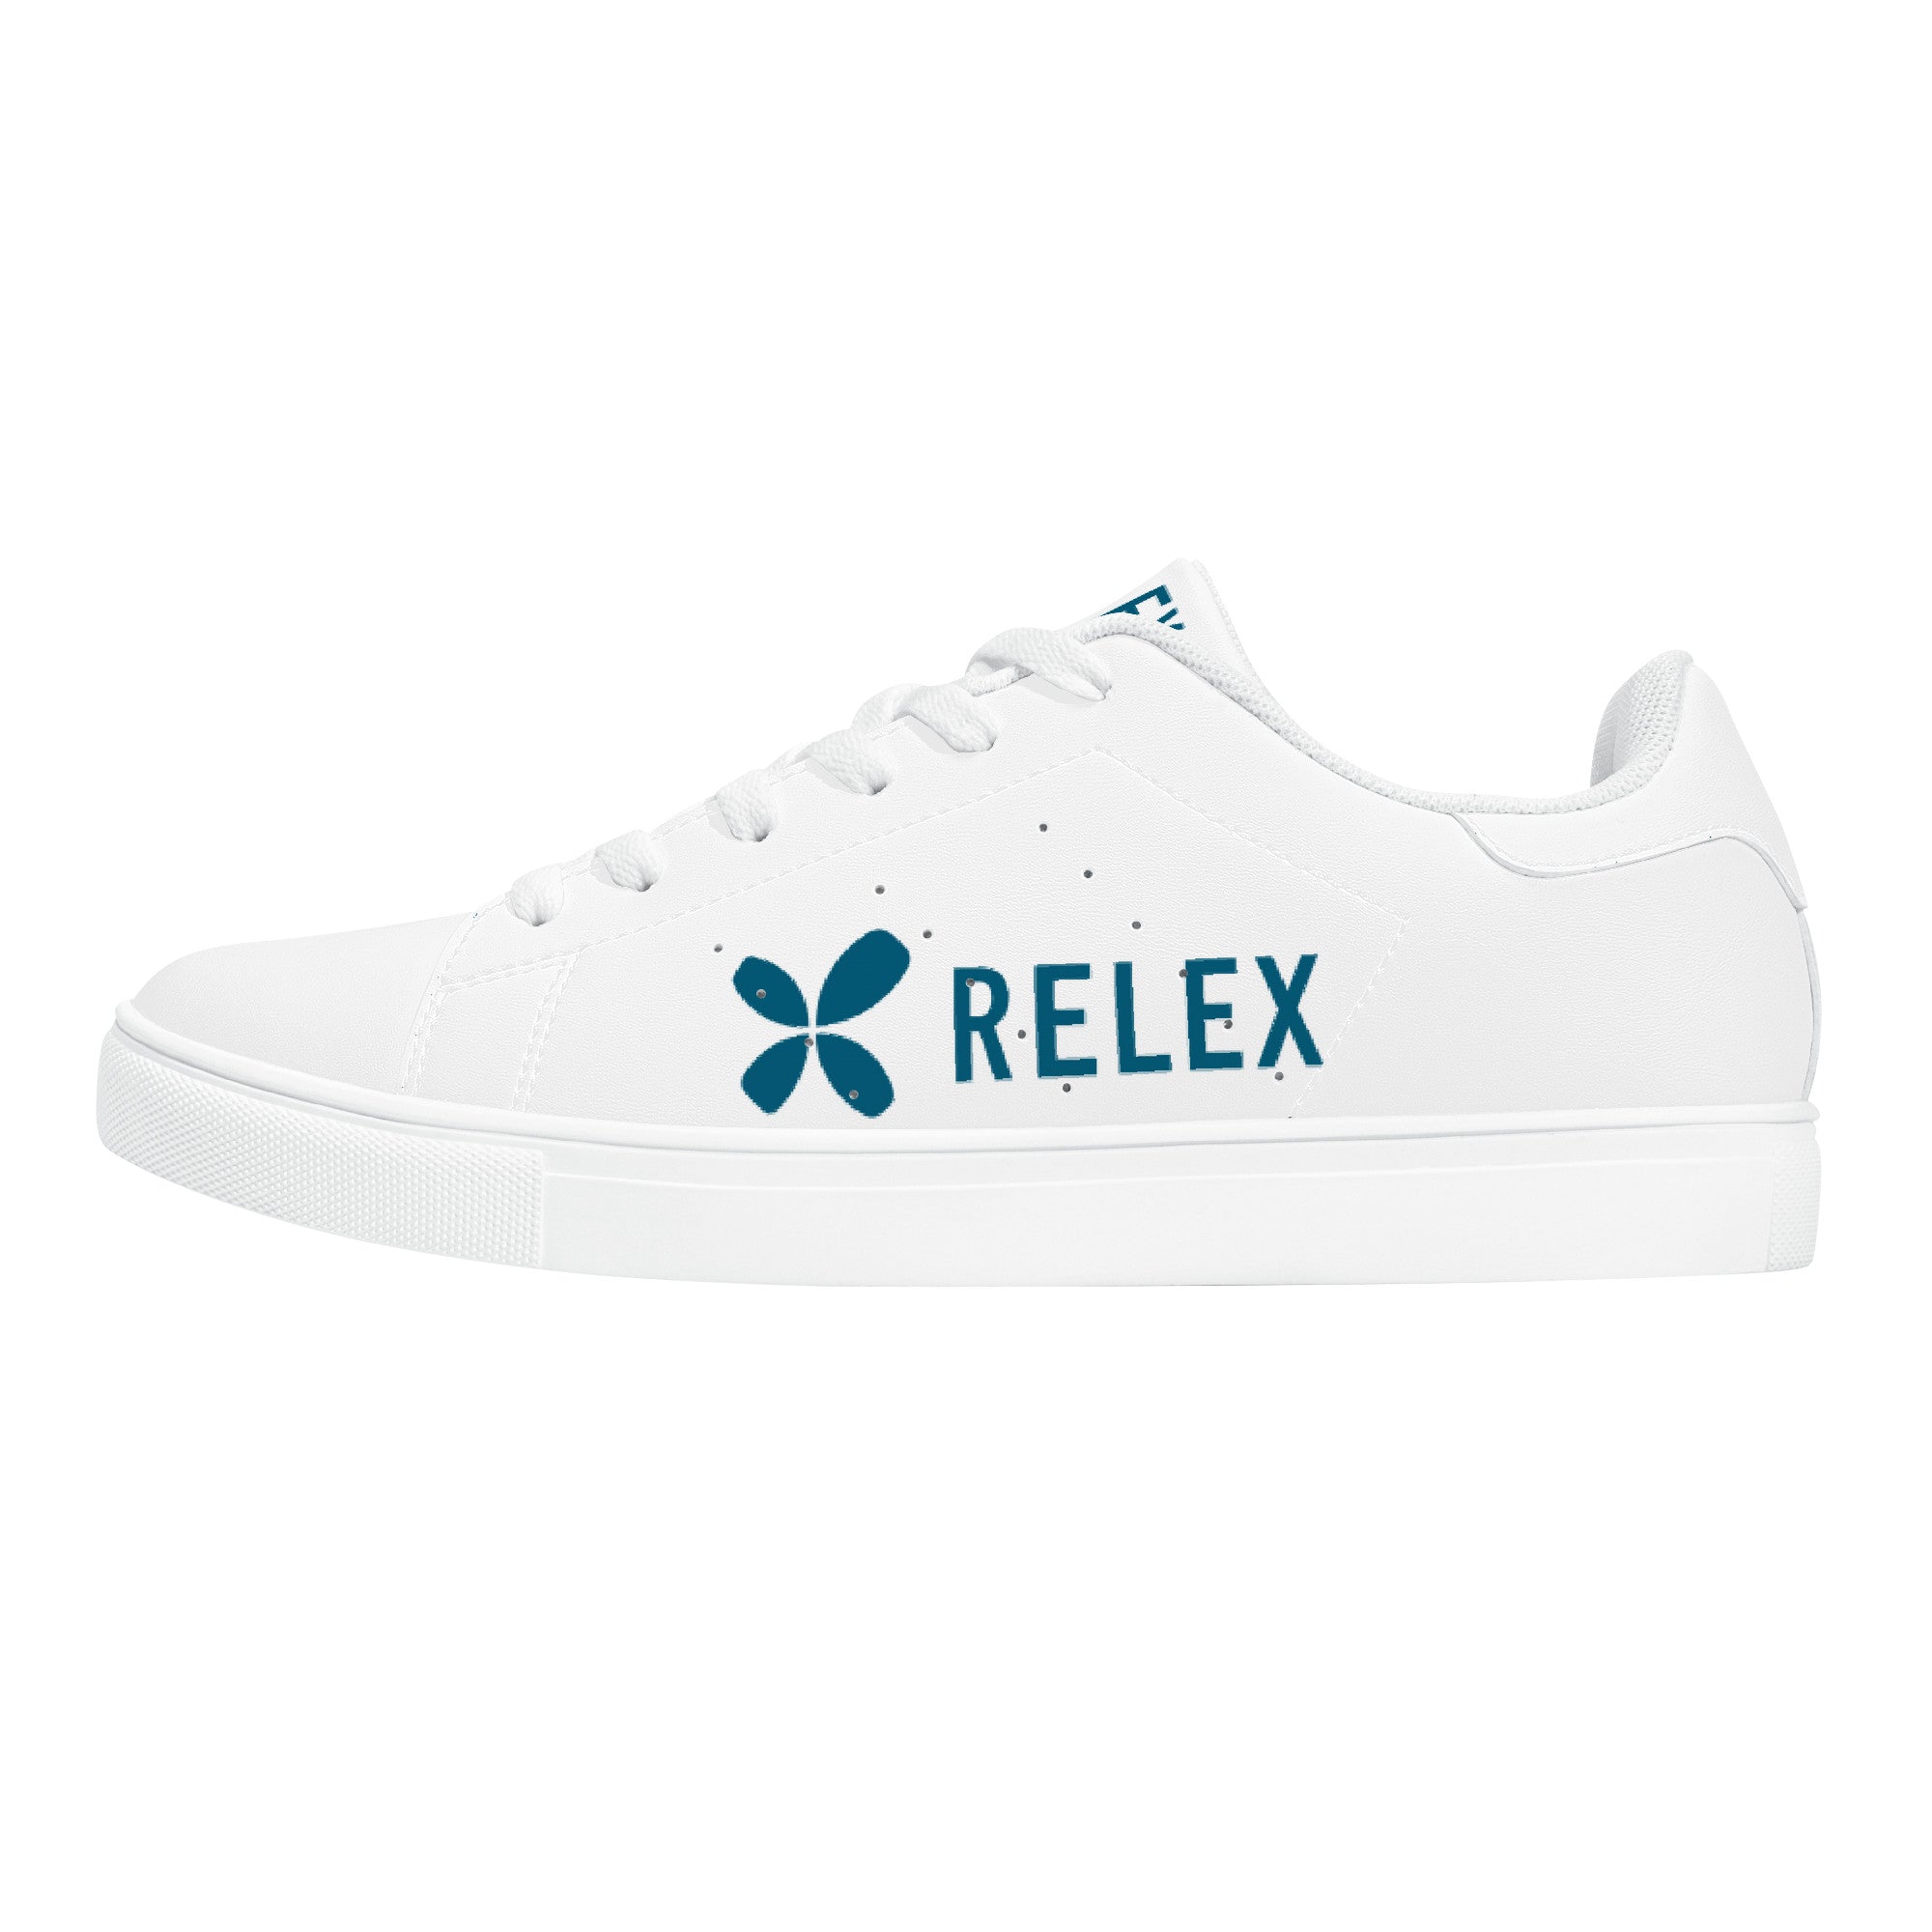 V2 RELEX | Low-Top Synthetic Leather Sneakers - White - Shoe Zero